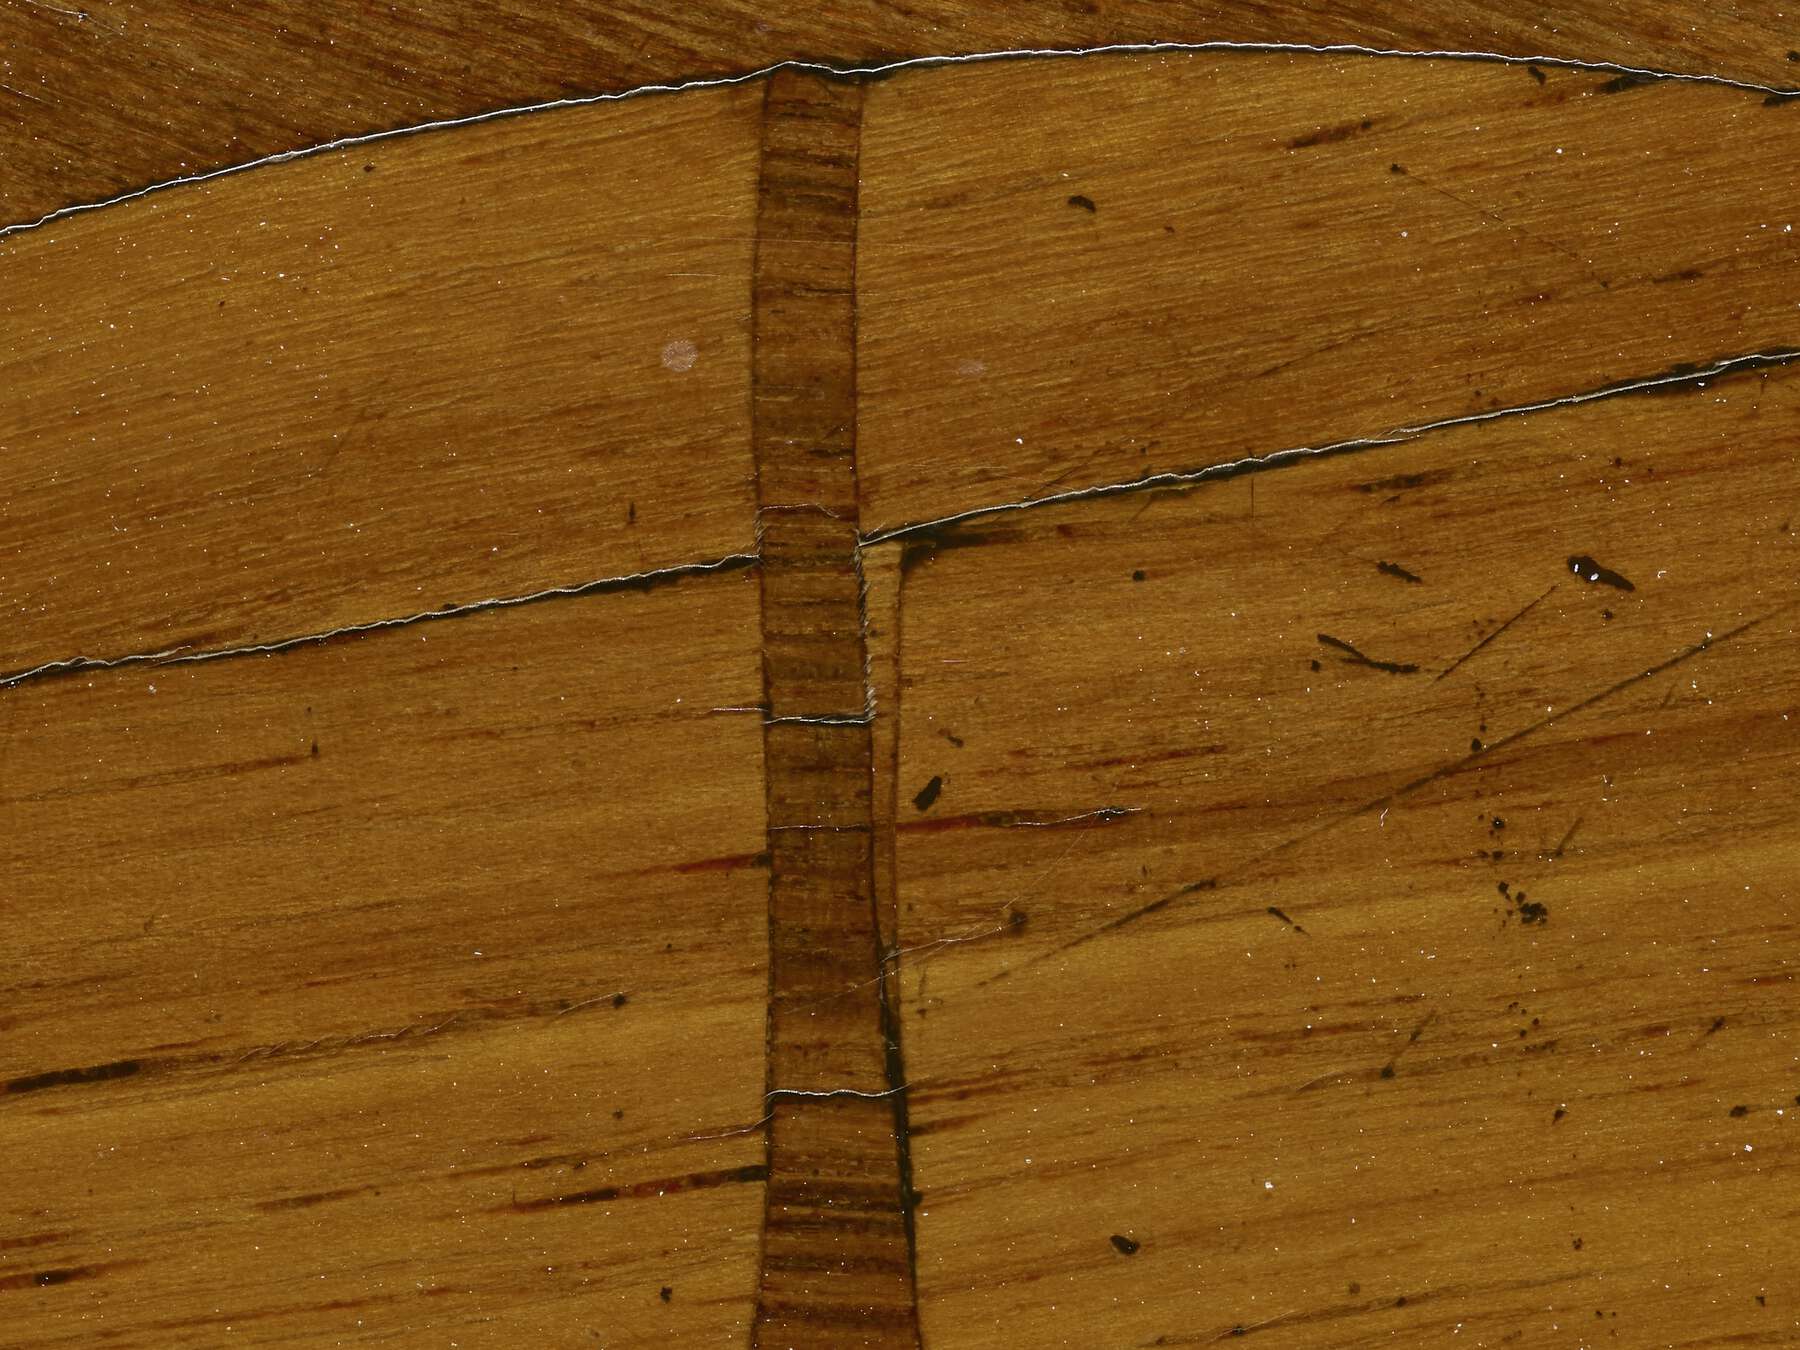 close-up of the marquetry against the veneer with visible knife marks